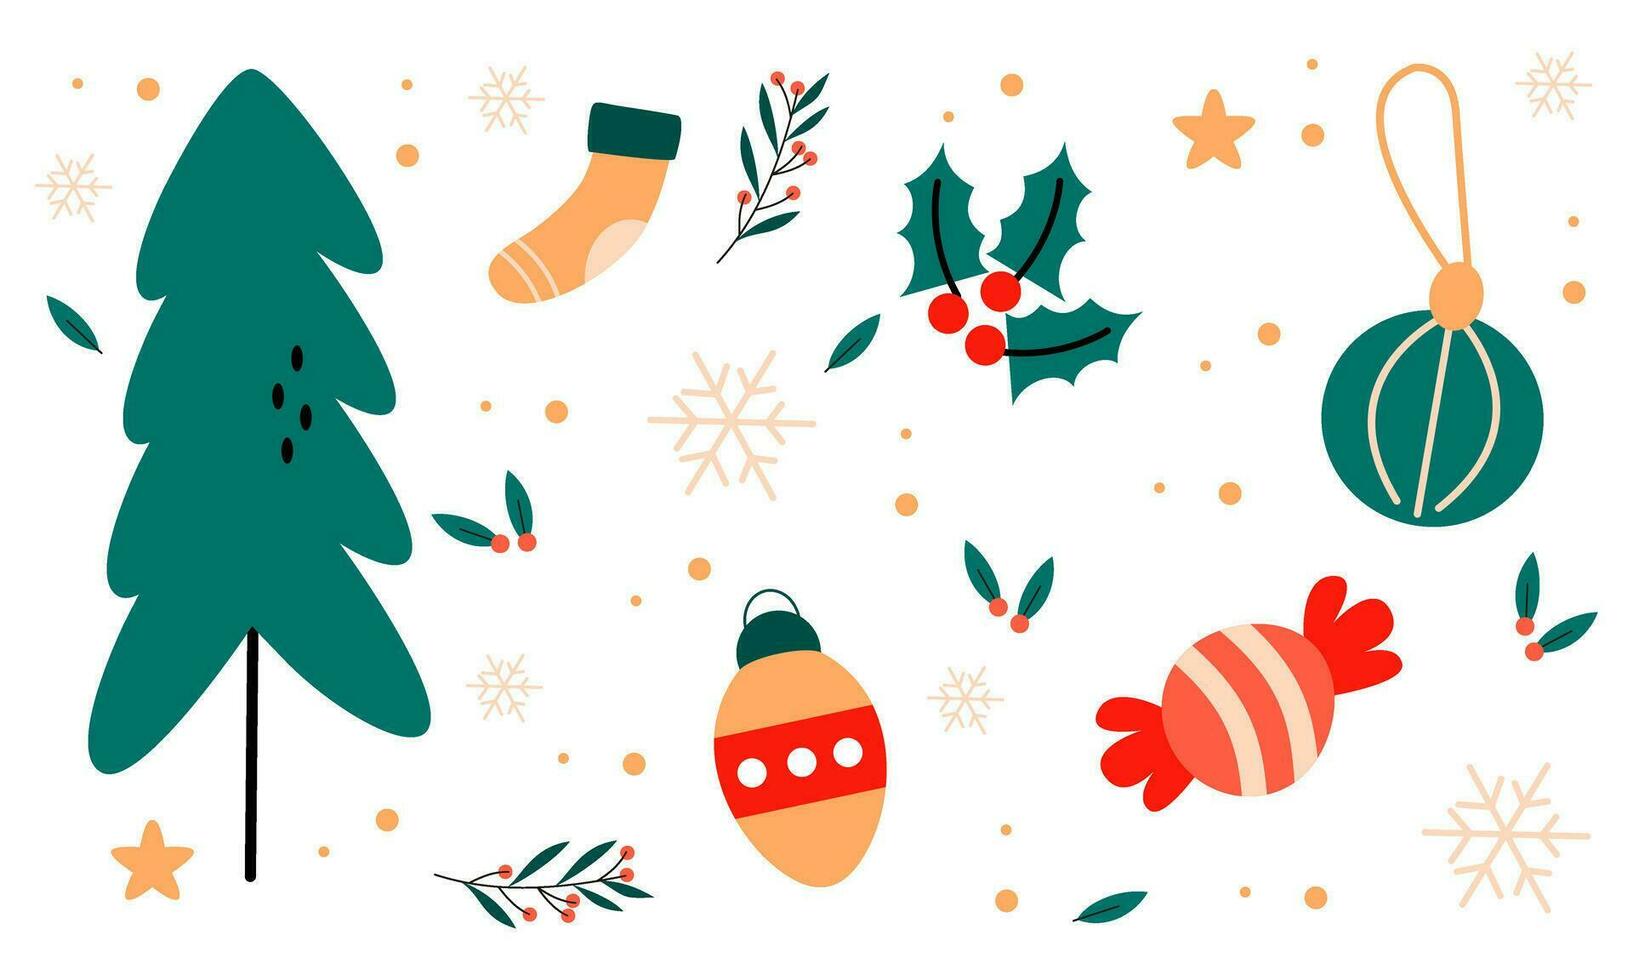 Christmas collection of decorative winter elements vector